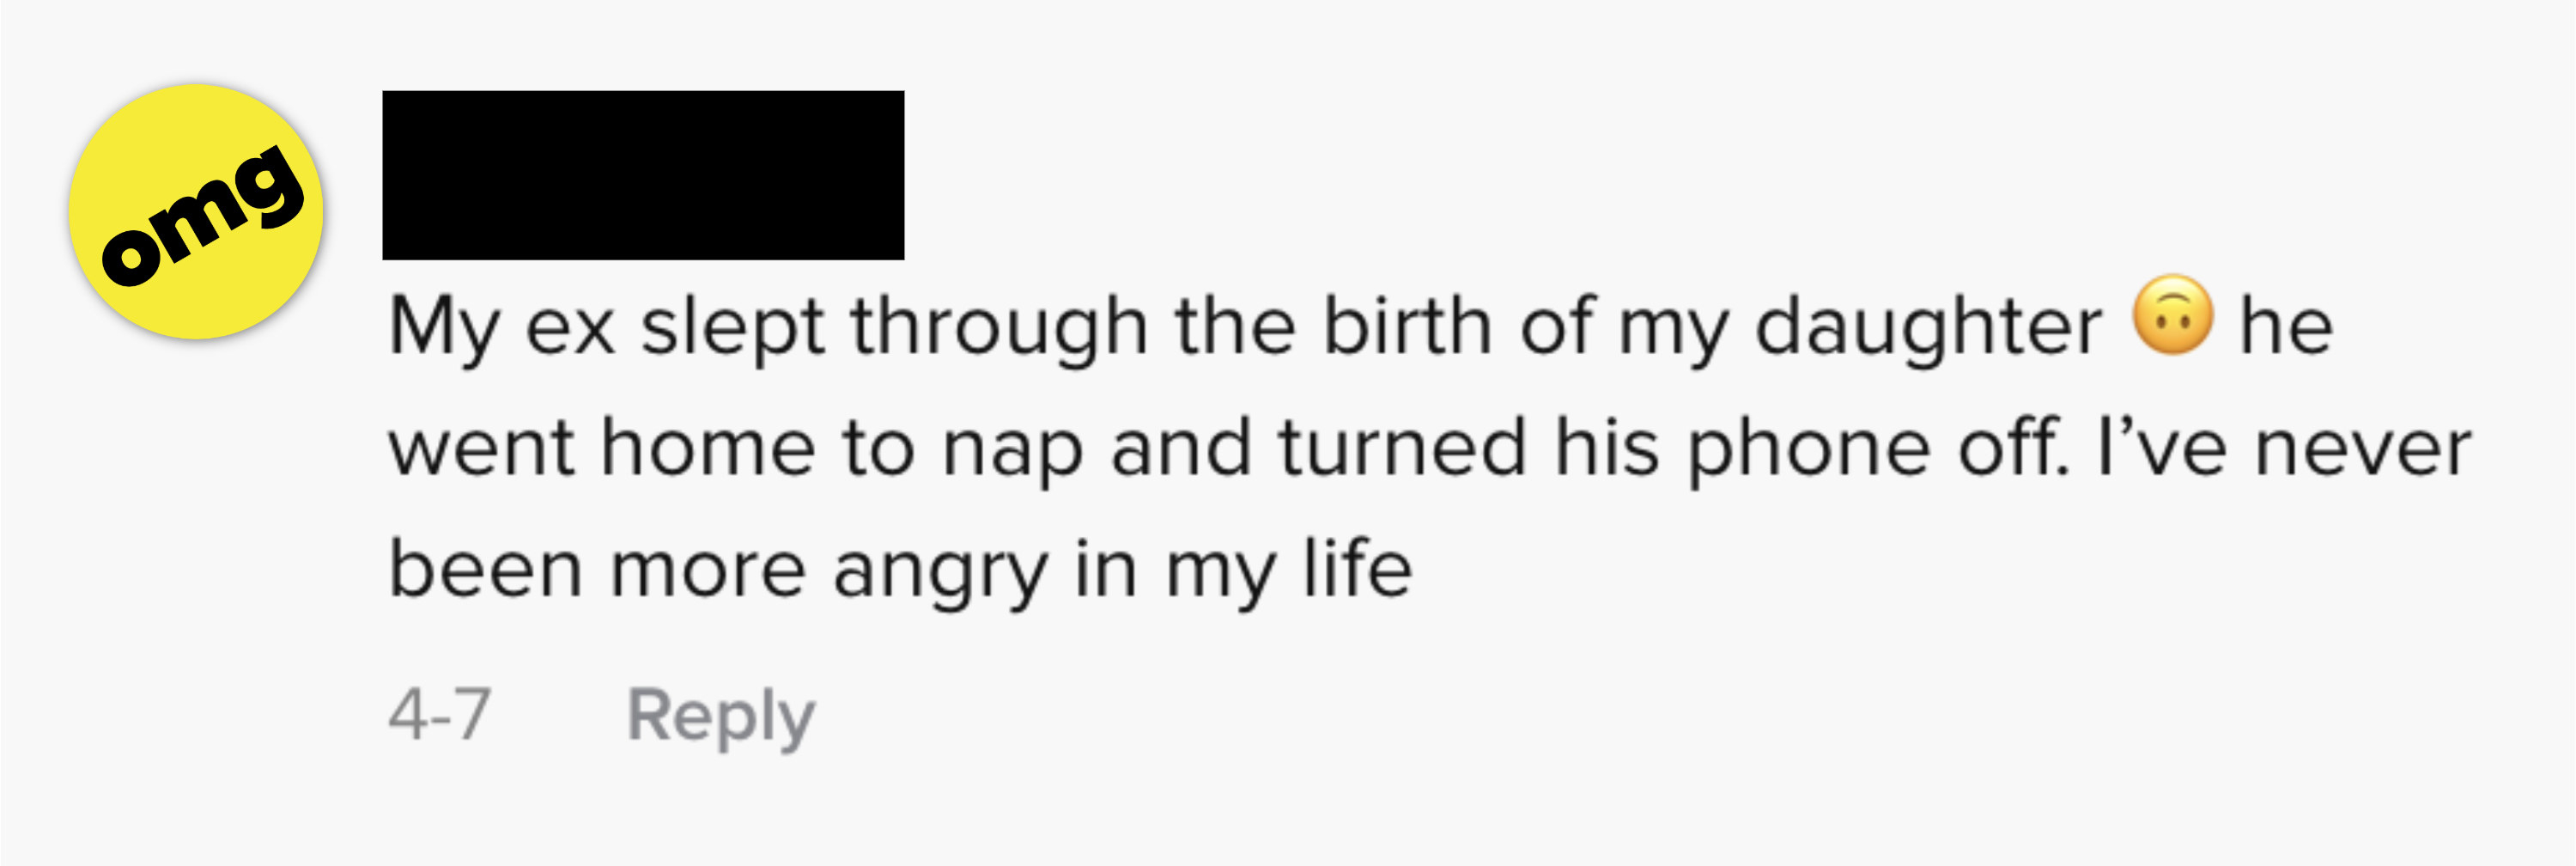 &quot;My ex slept through the birth of my daughter, he went home to nap and turned his phone off, I&#x27;ve never been more angry in my life&quot;